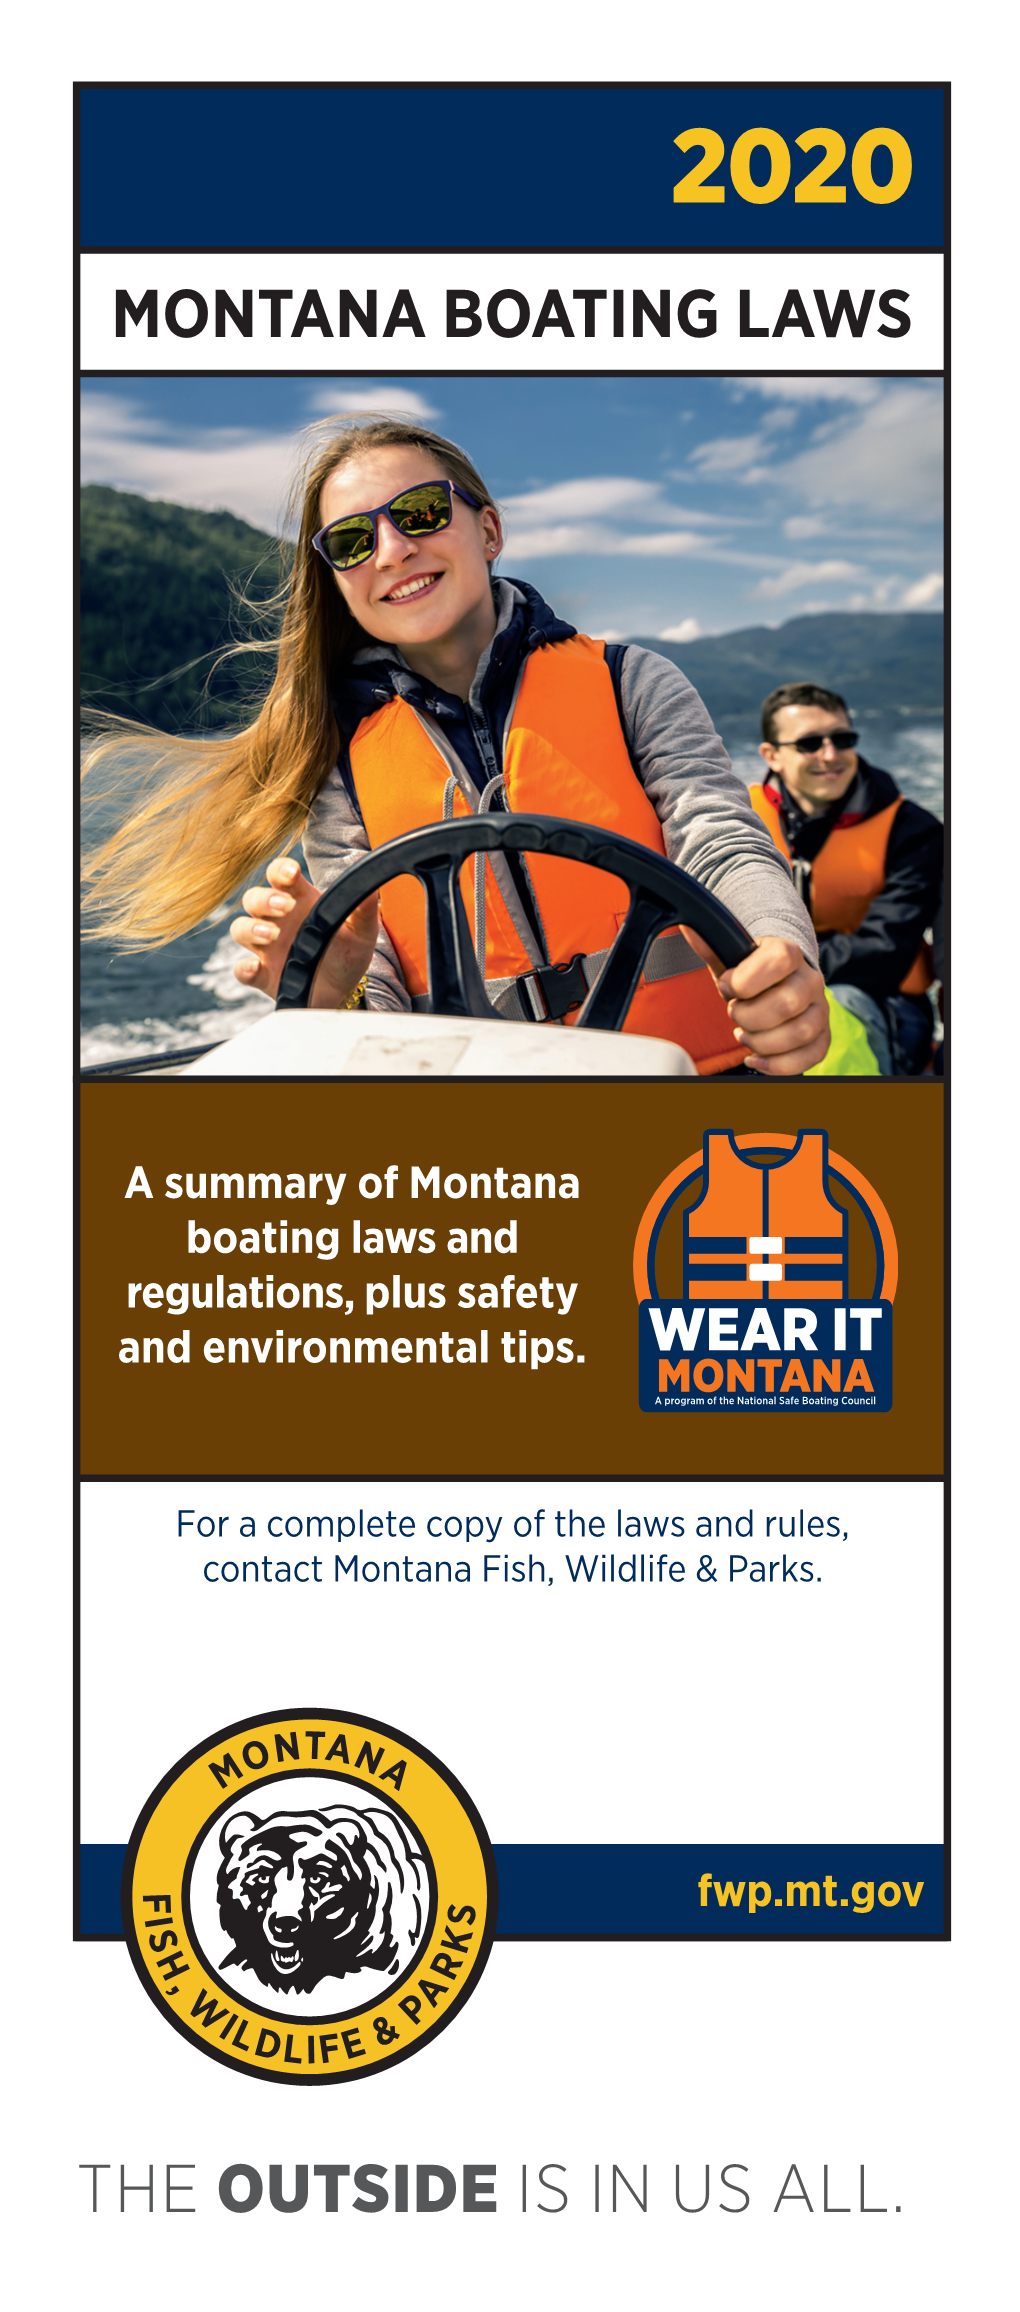 The Outside Is in Us All. Montana Boating Laws